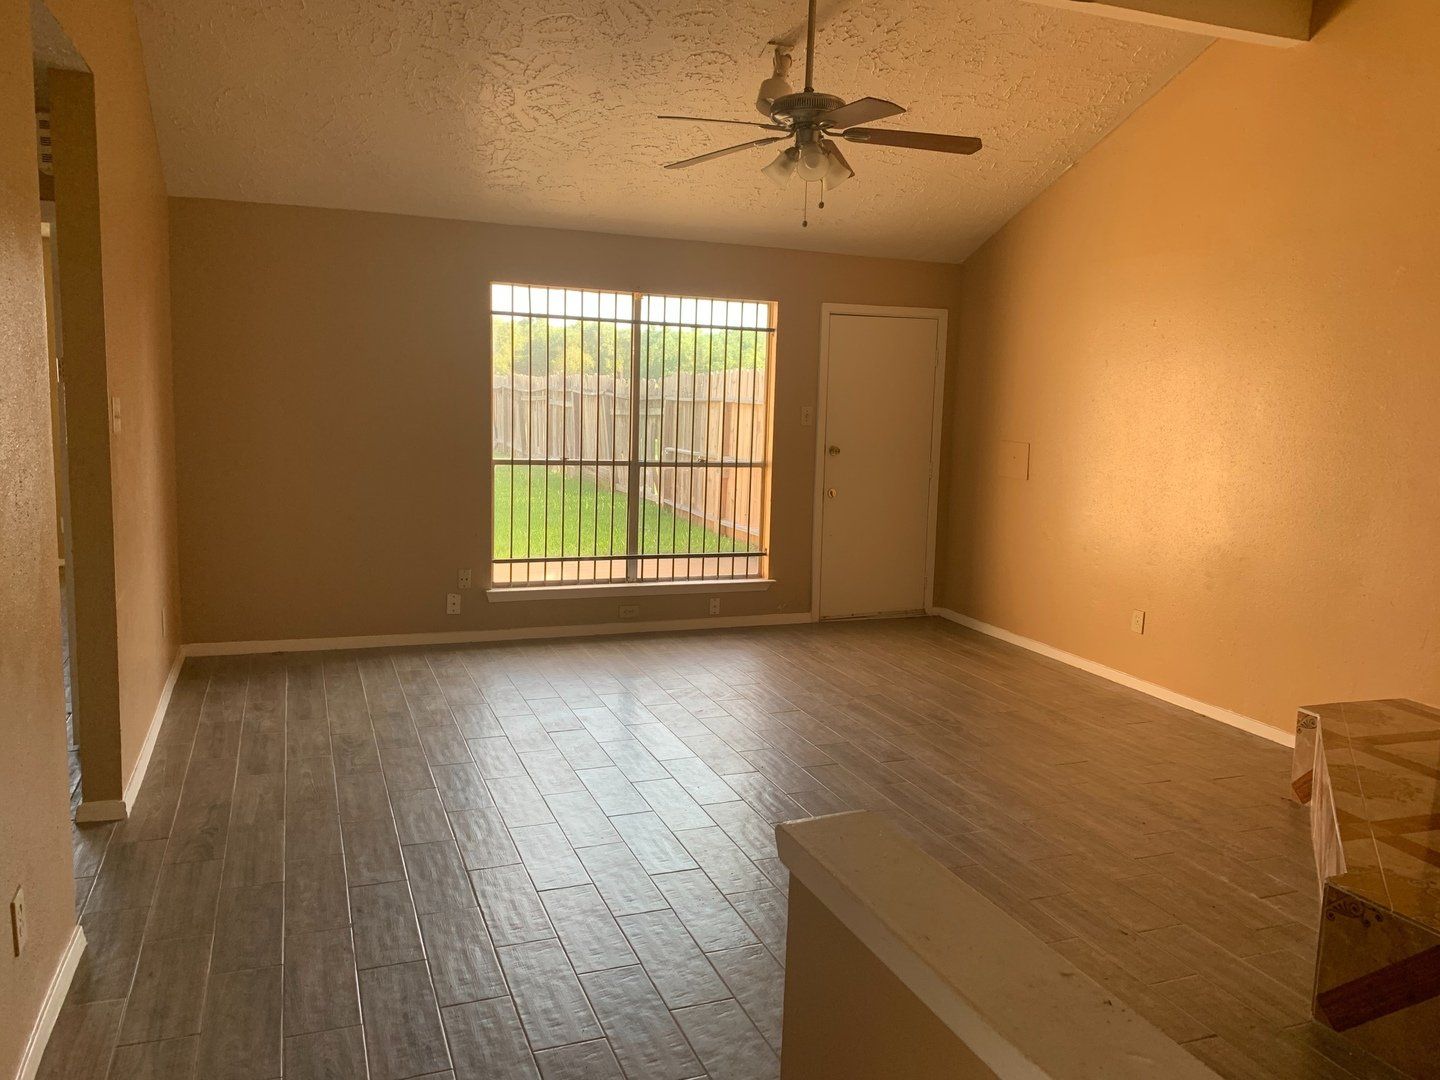 For rent duplex in Fort Bend Houston